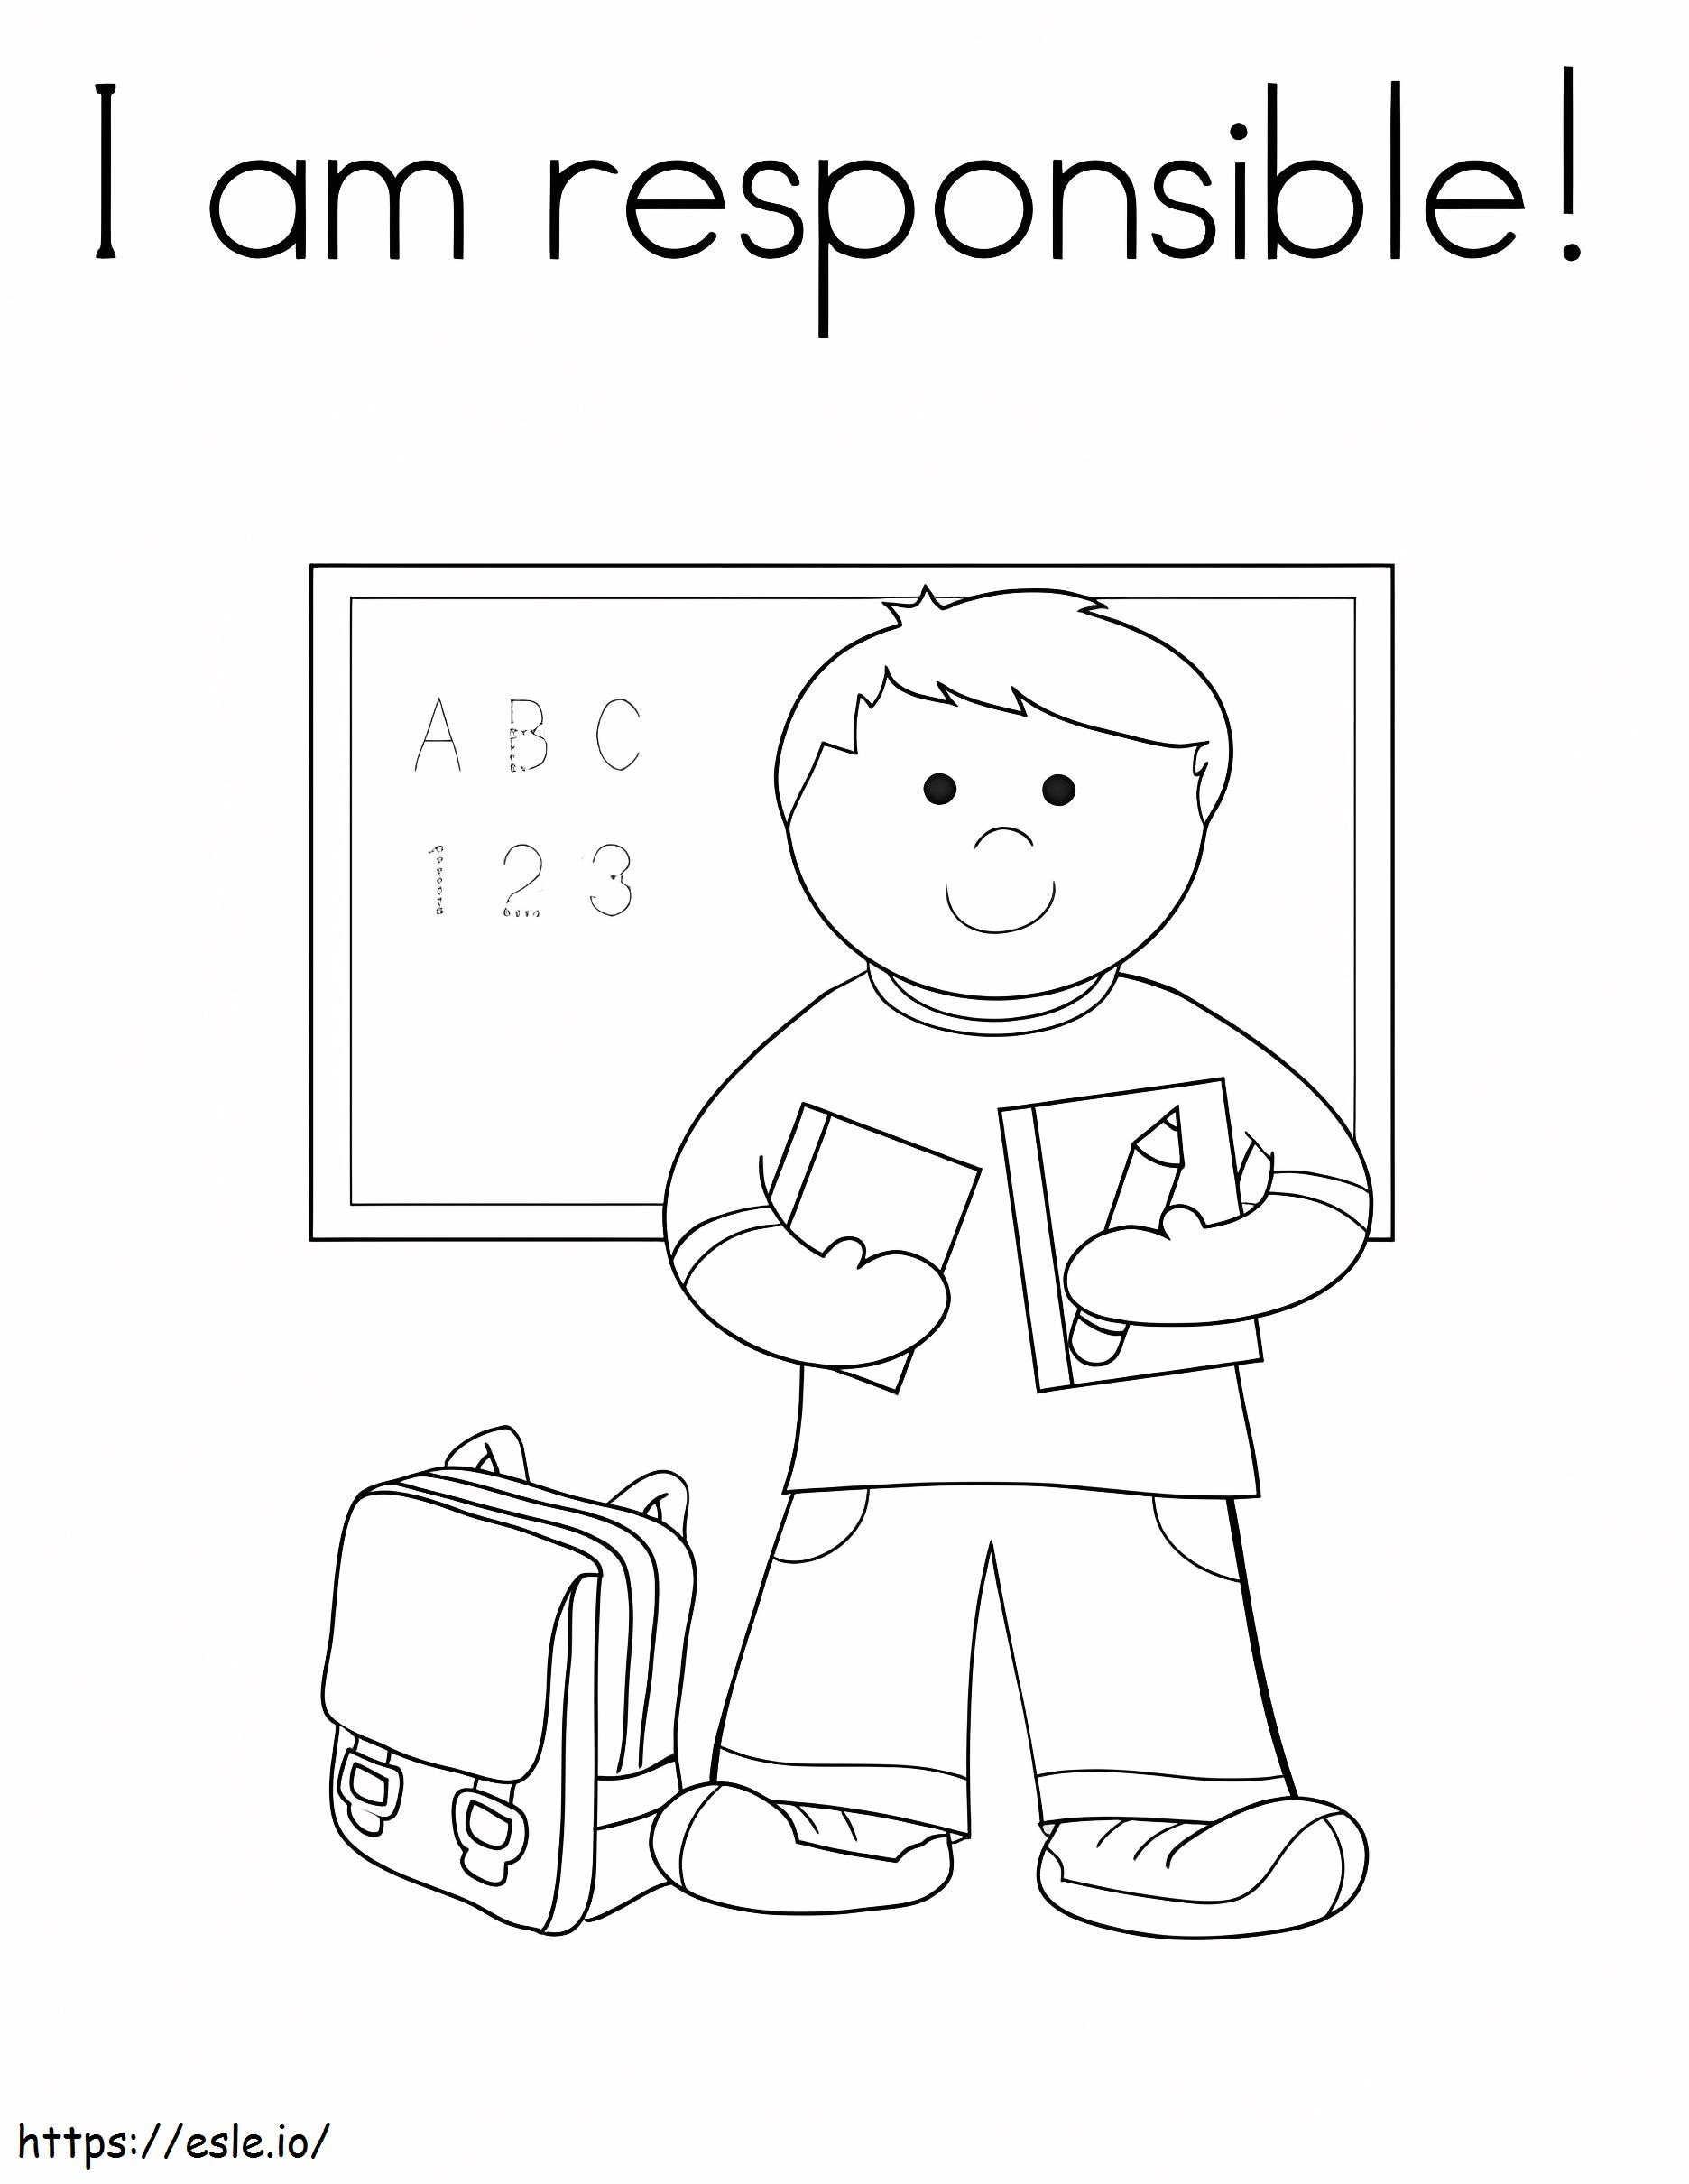 I Am Responsible coloring page